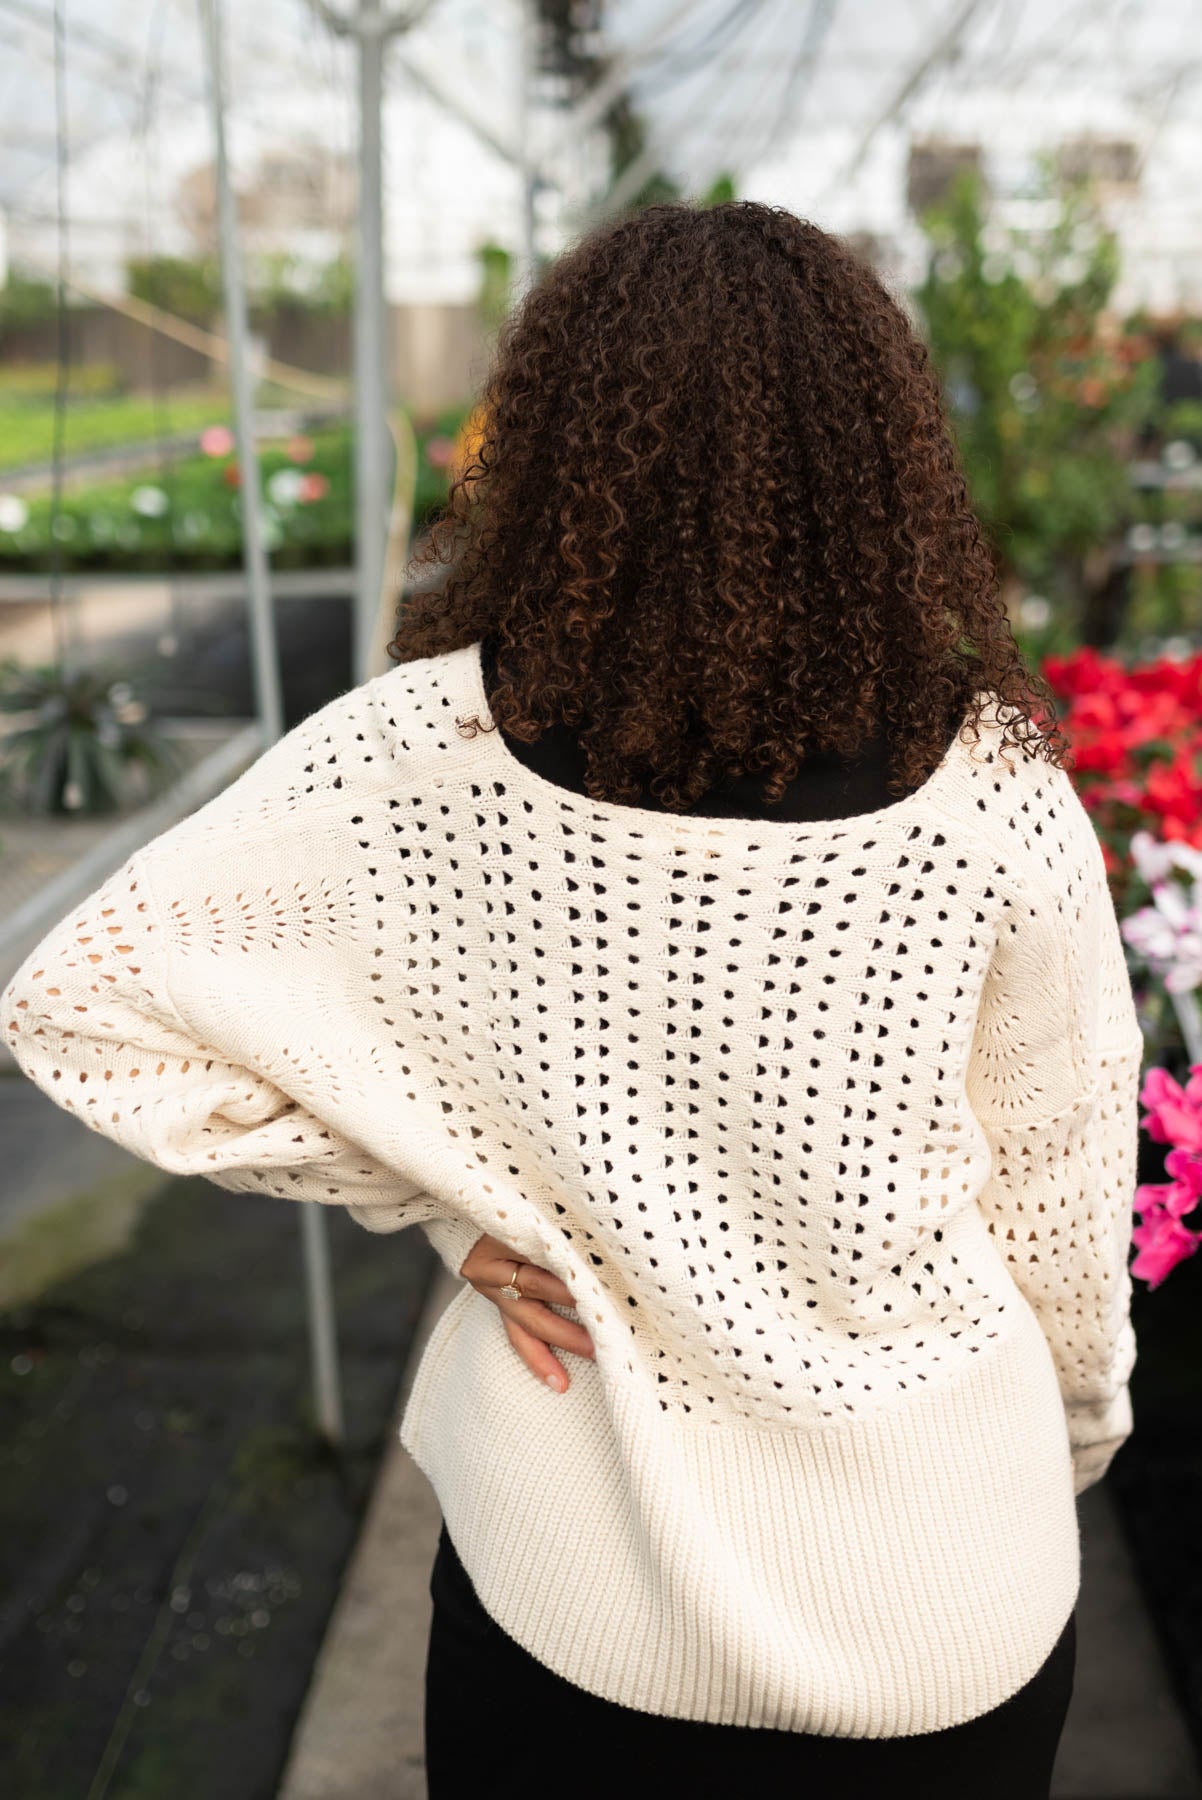 Back view of the ivory knitted cardigan